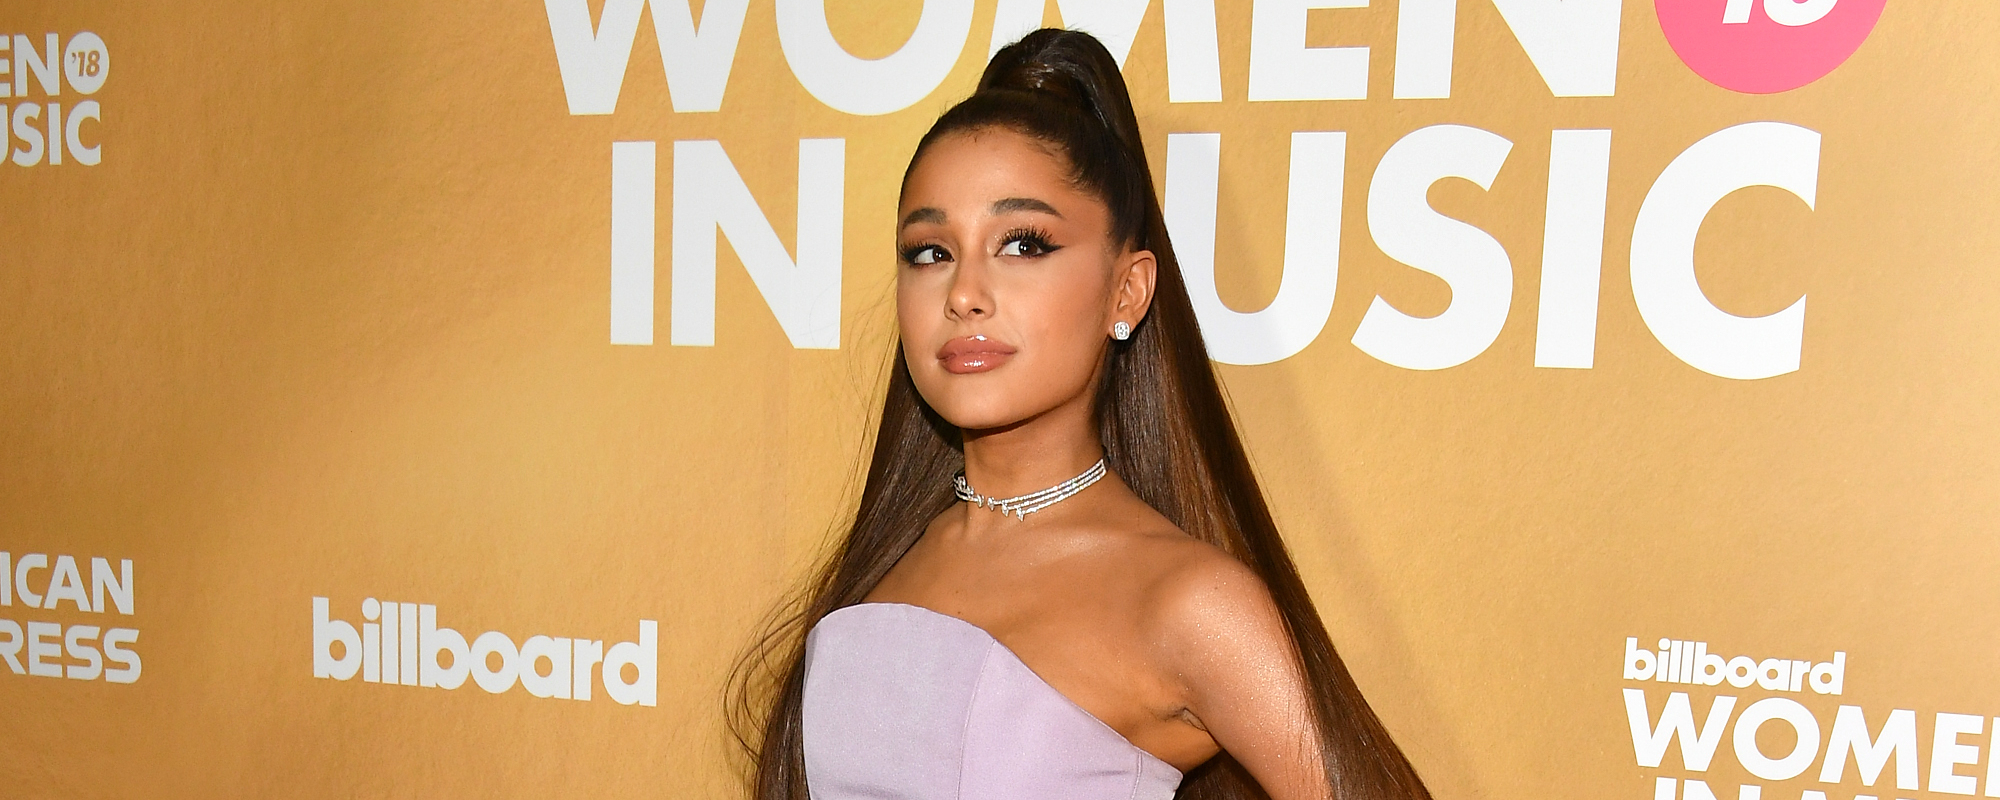 Ariana Grande To Perform on ‘SNL’ Tonight, Who Is Hosting?